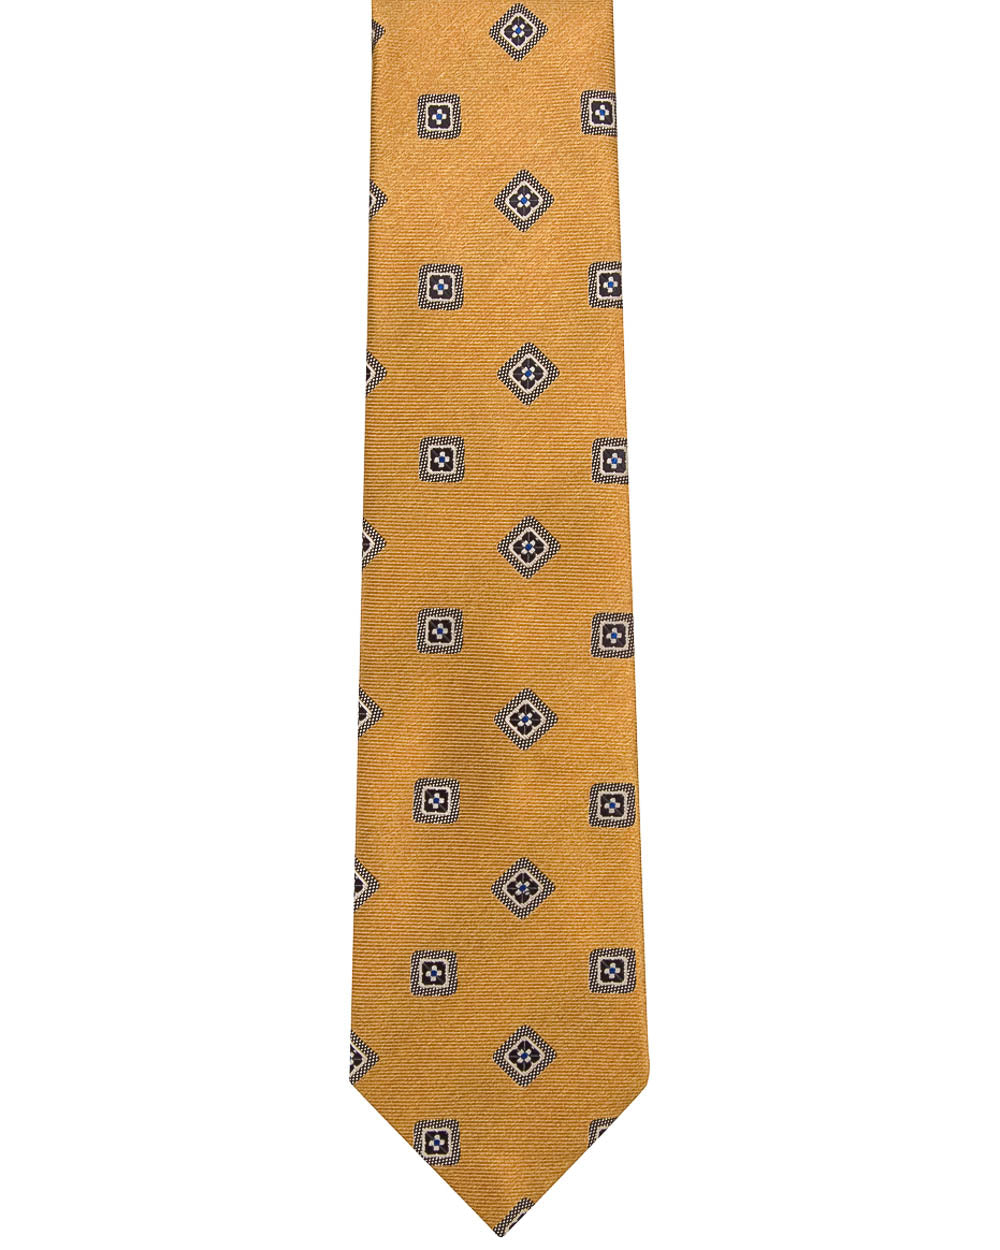 Gold with Navy and Sky Blue Geometric Tie